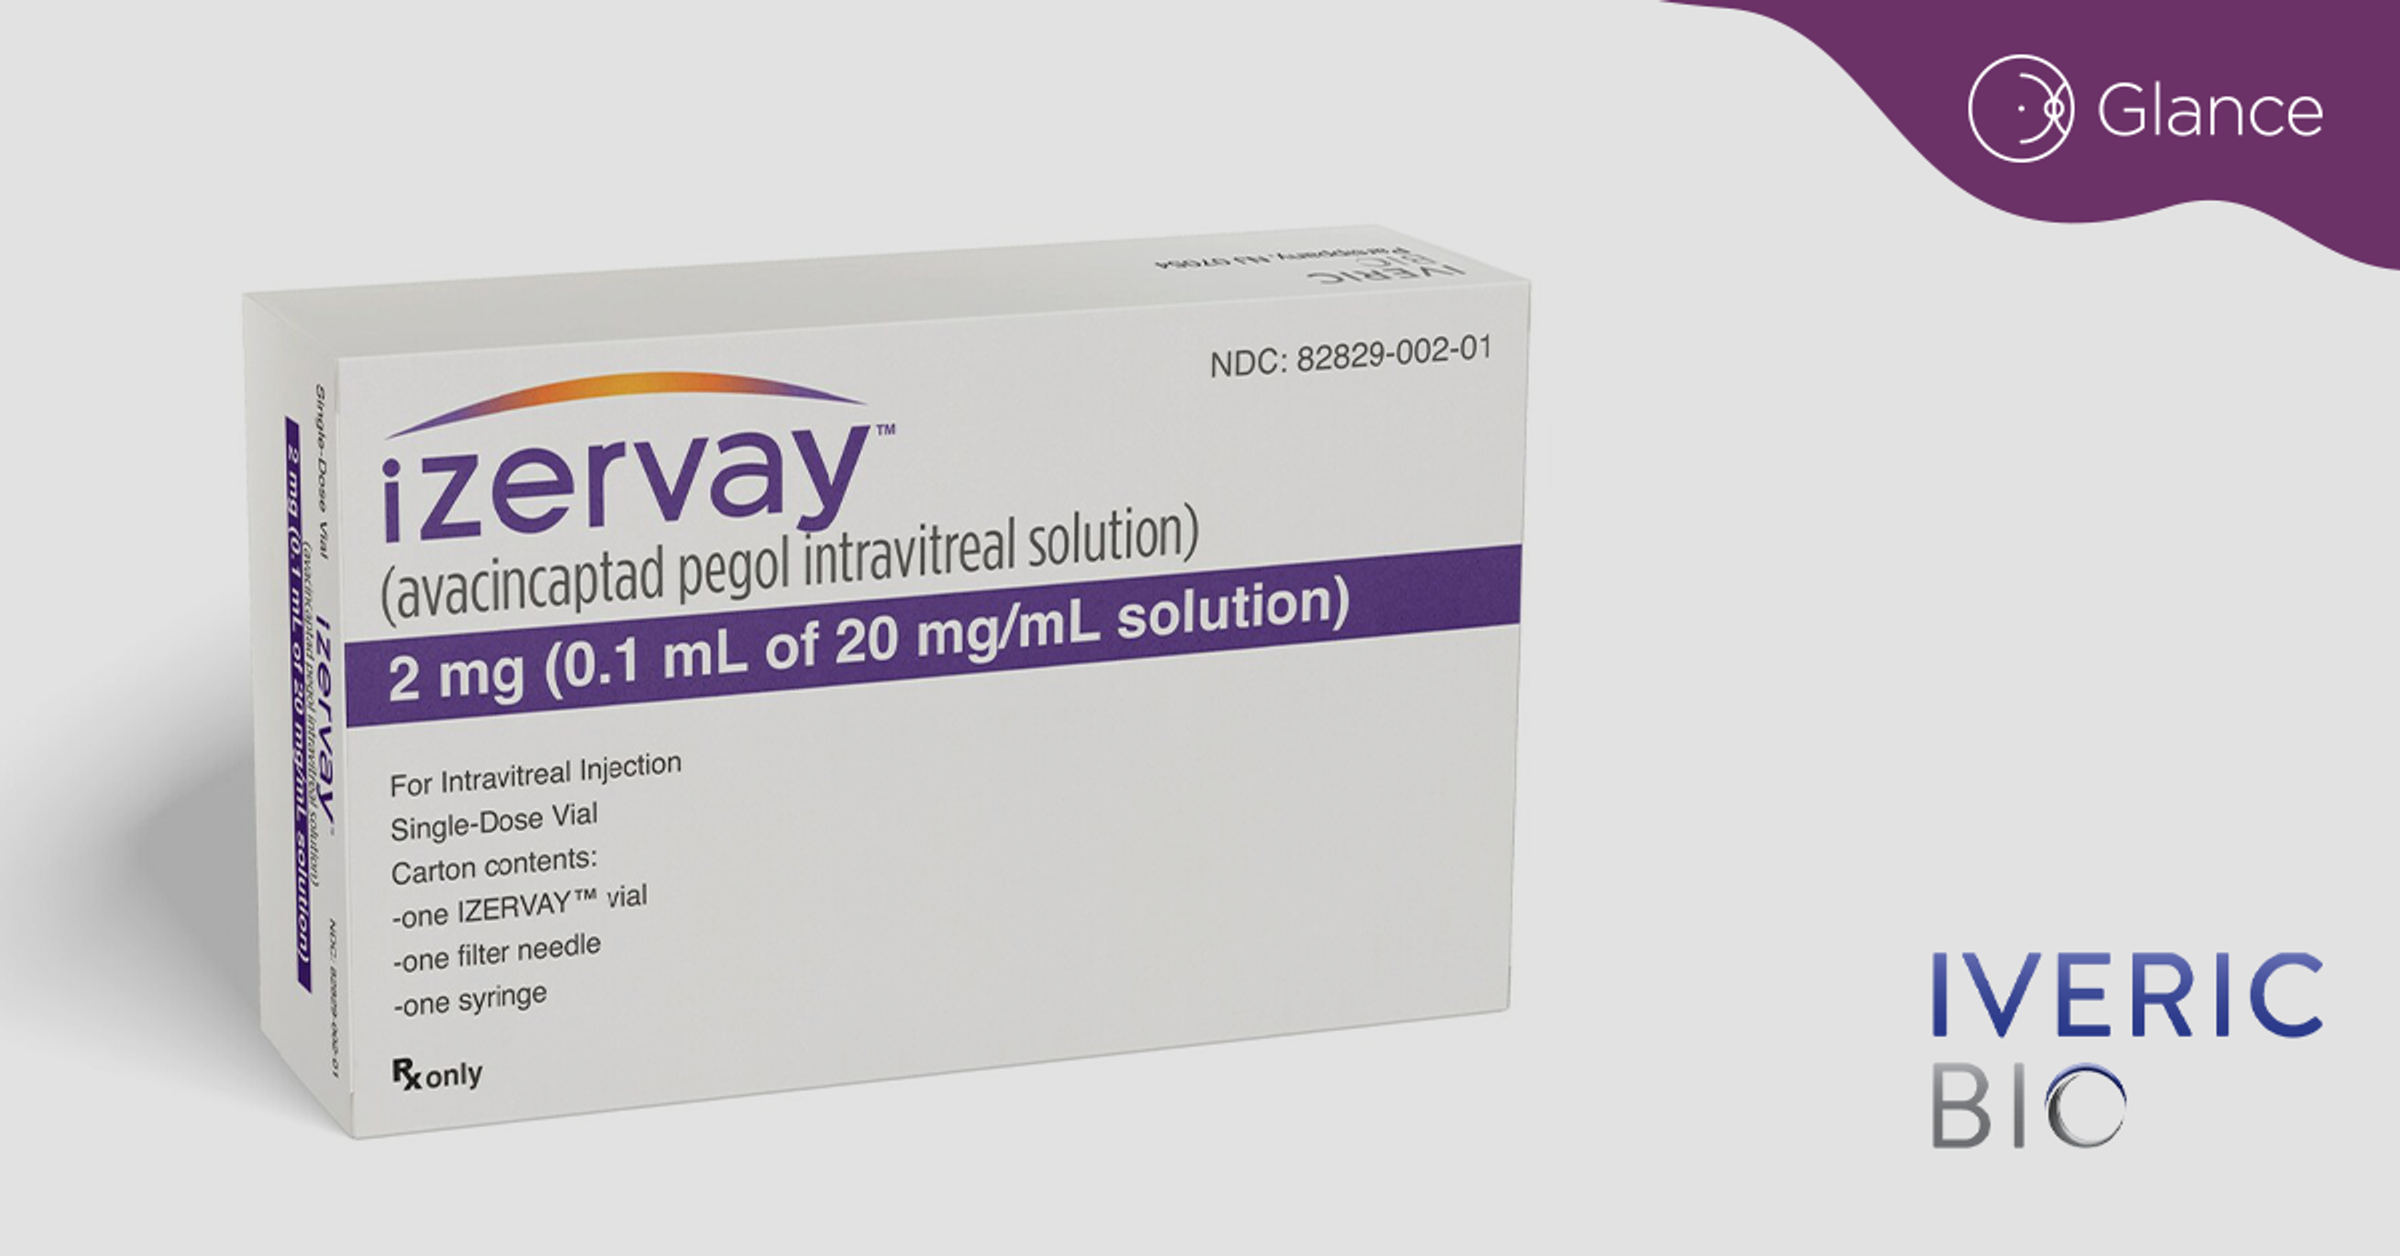  Positive 24-month data reported in phase 3 study of IZERVAY for GA